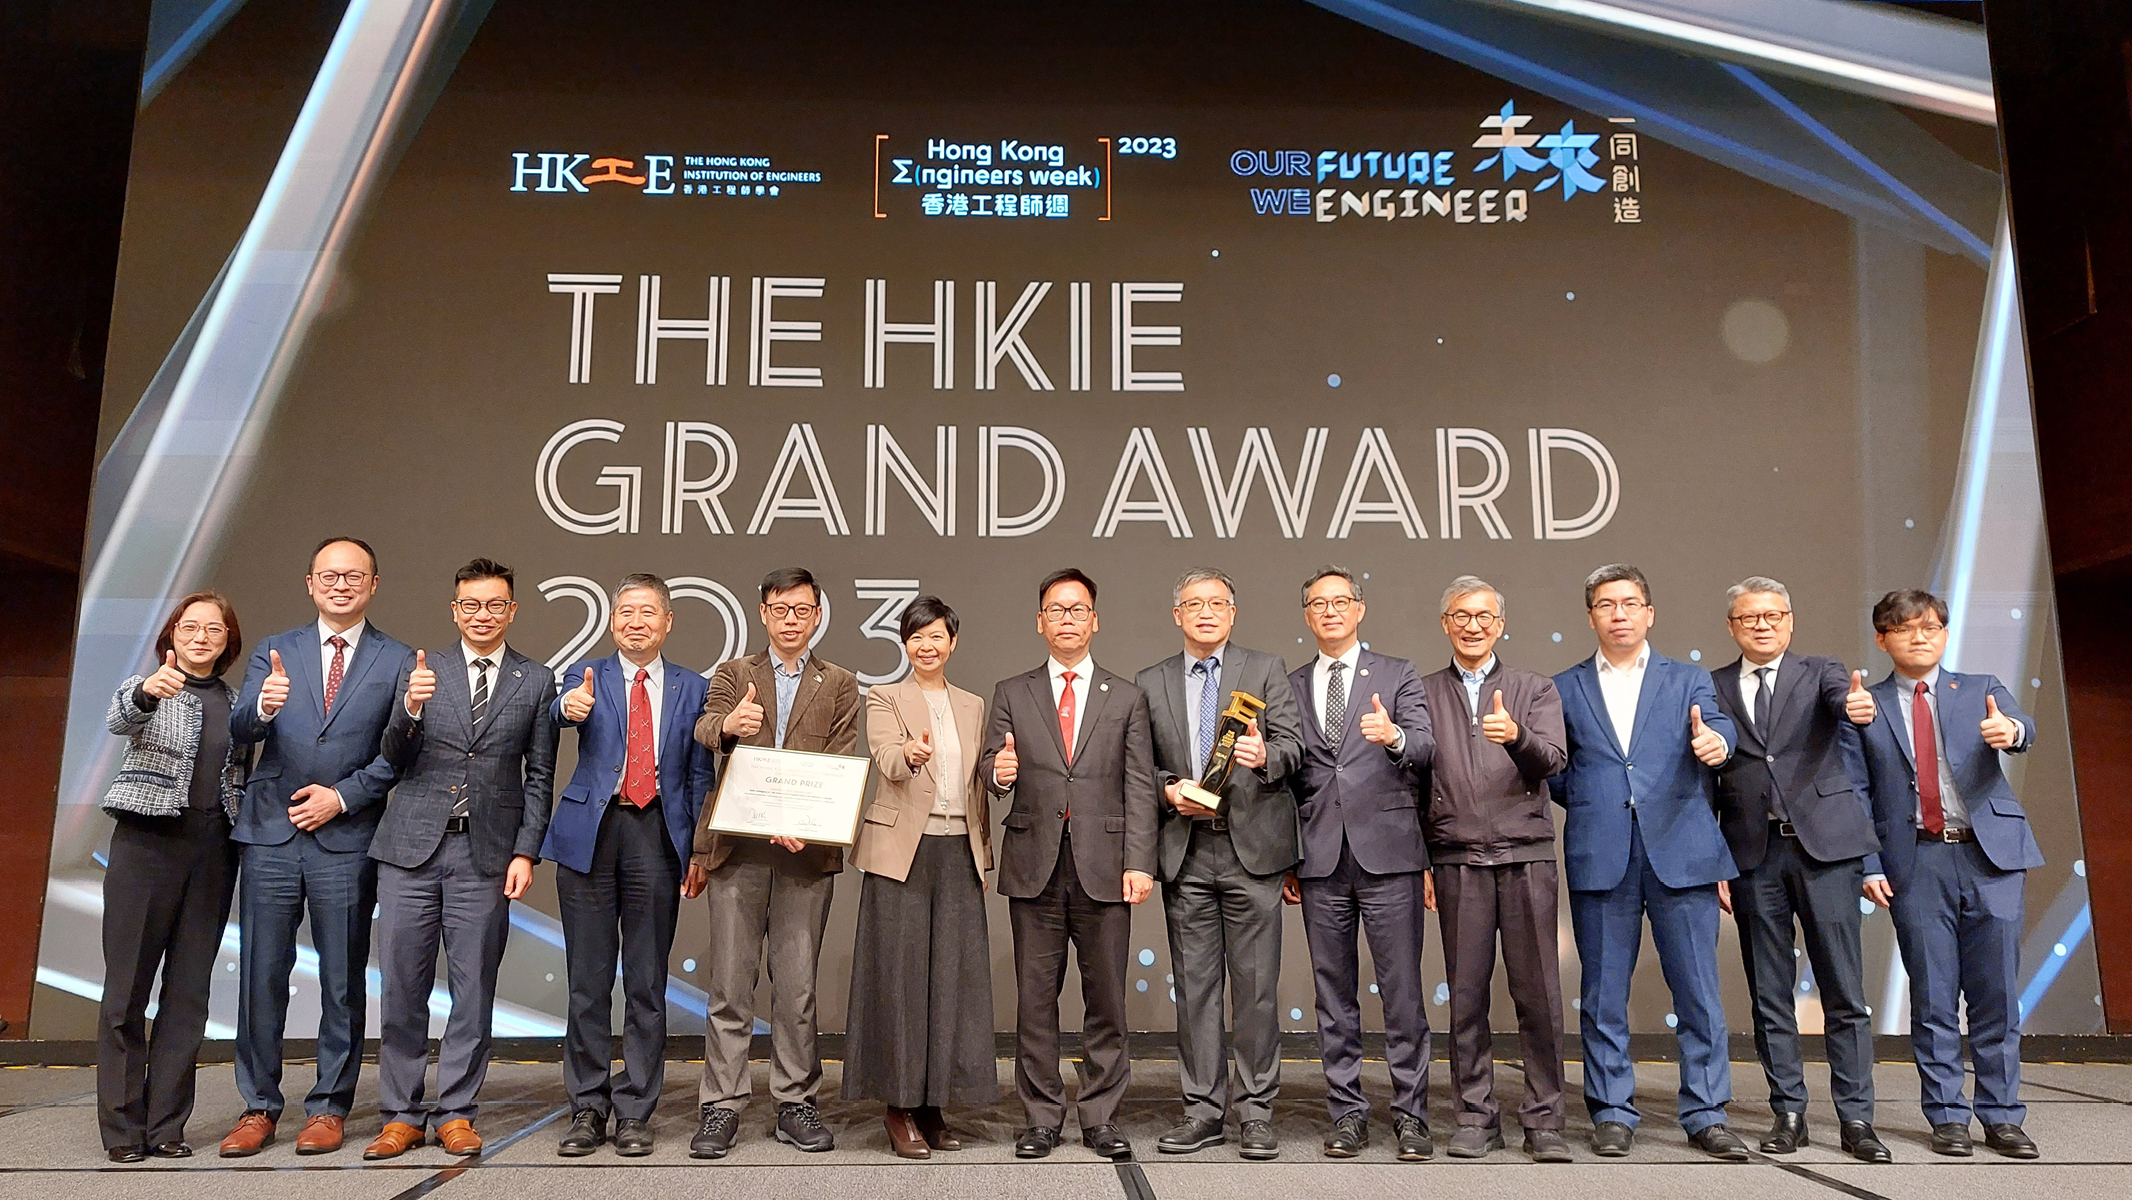 Members of PolyU showed their support when Professor Chung(sixth from right) received the HKIE Grand Award fromMs Winnie Ho, Secretary for Housing of HKSAR Government(sixth from left), and Ir Aaron Bok Kwok-ming, President ofHKIE (centre), on 9 March 2023.